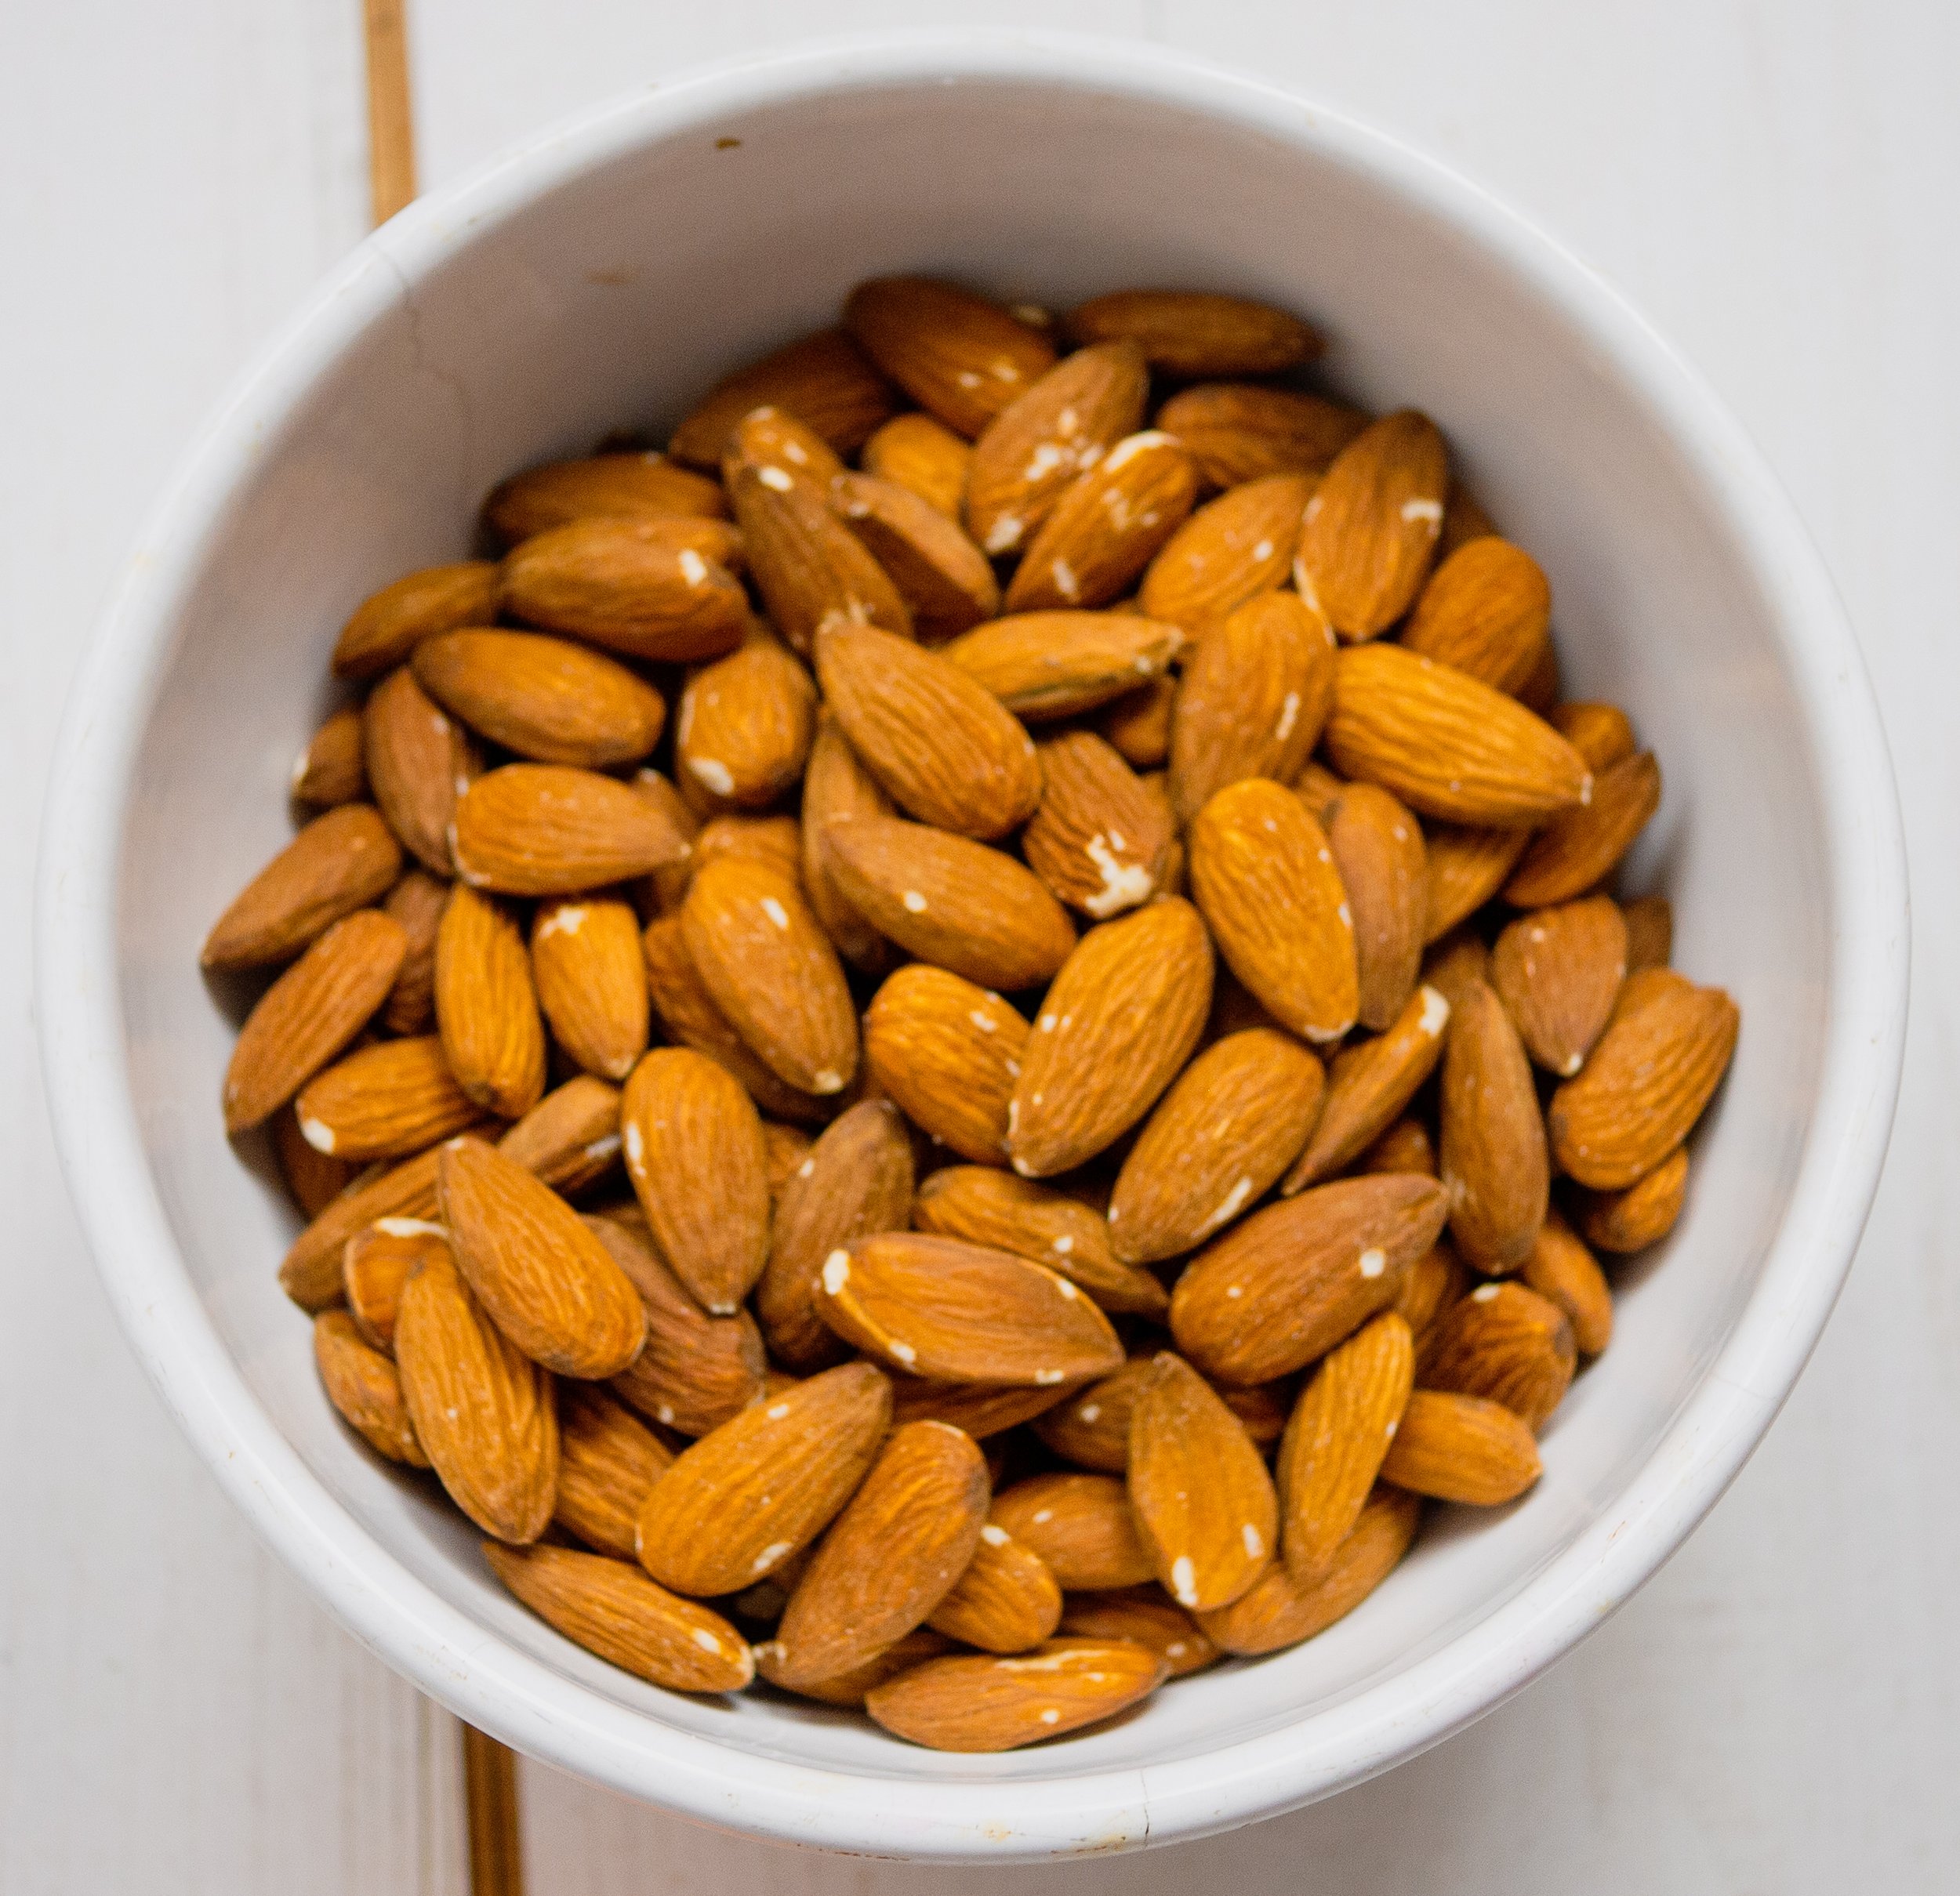 roasted nuts recipe by kam sokhi allergy chef 